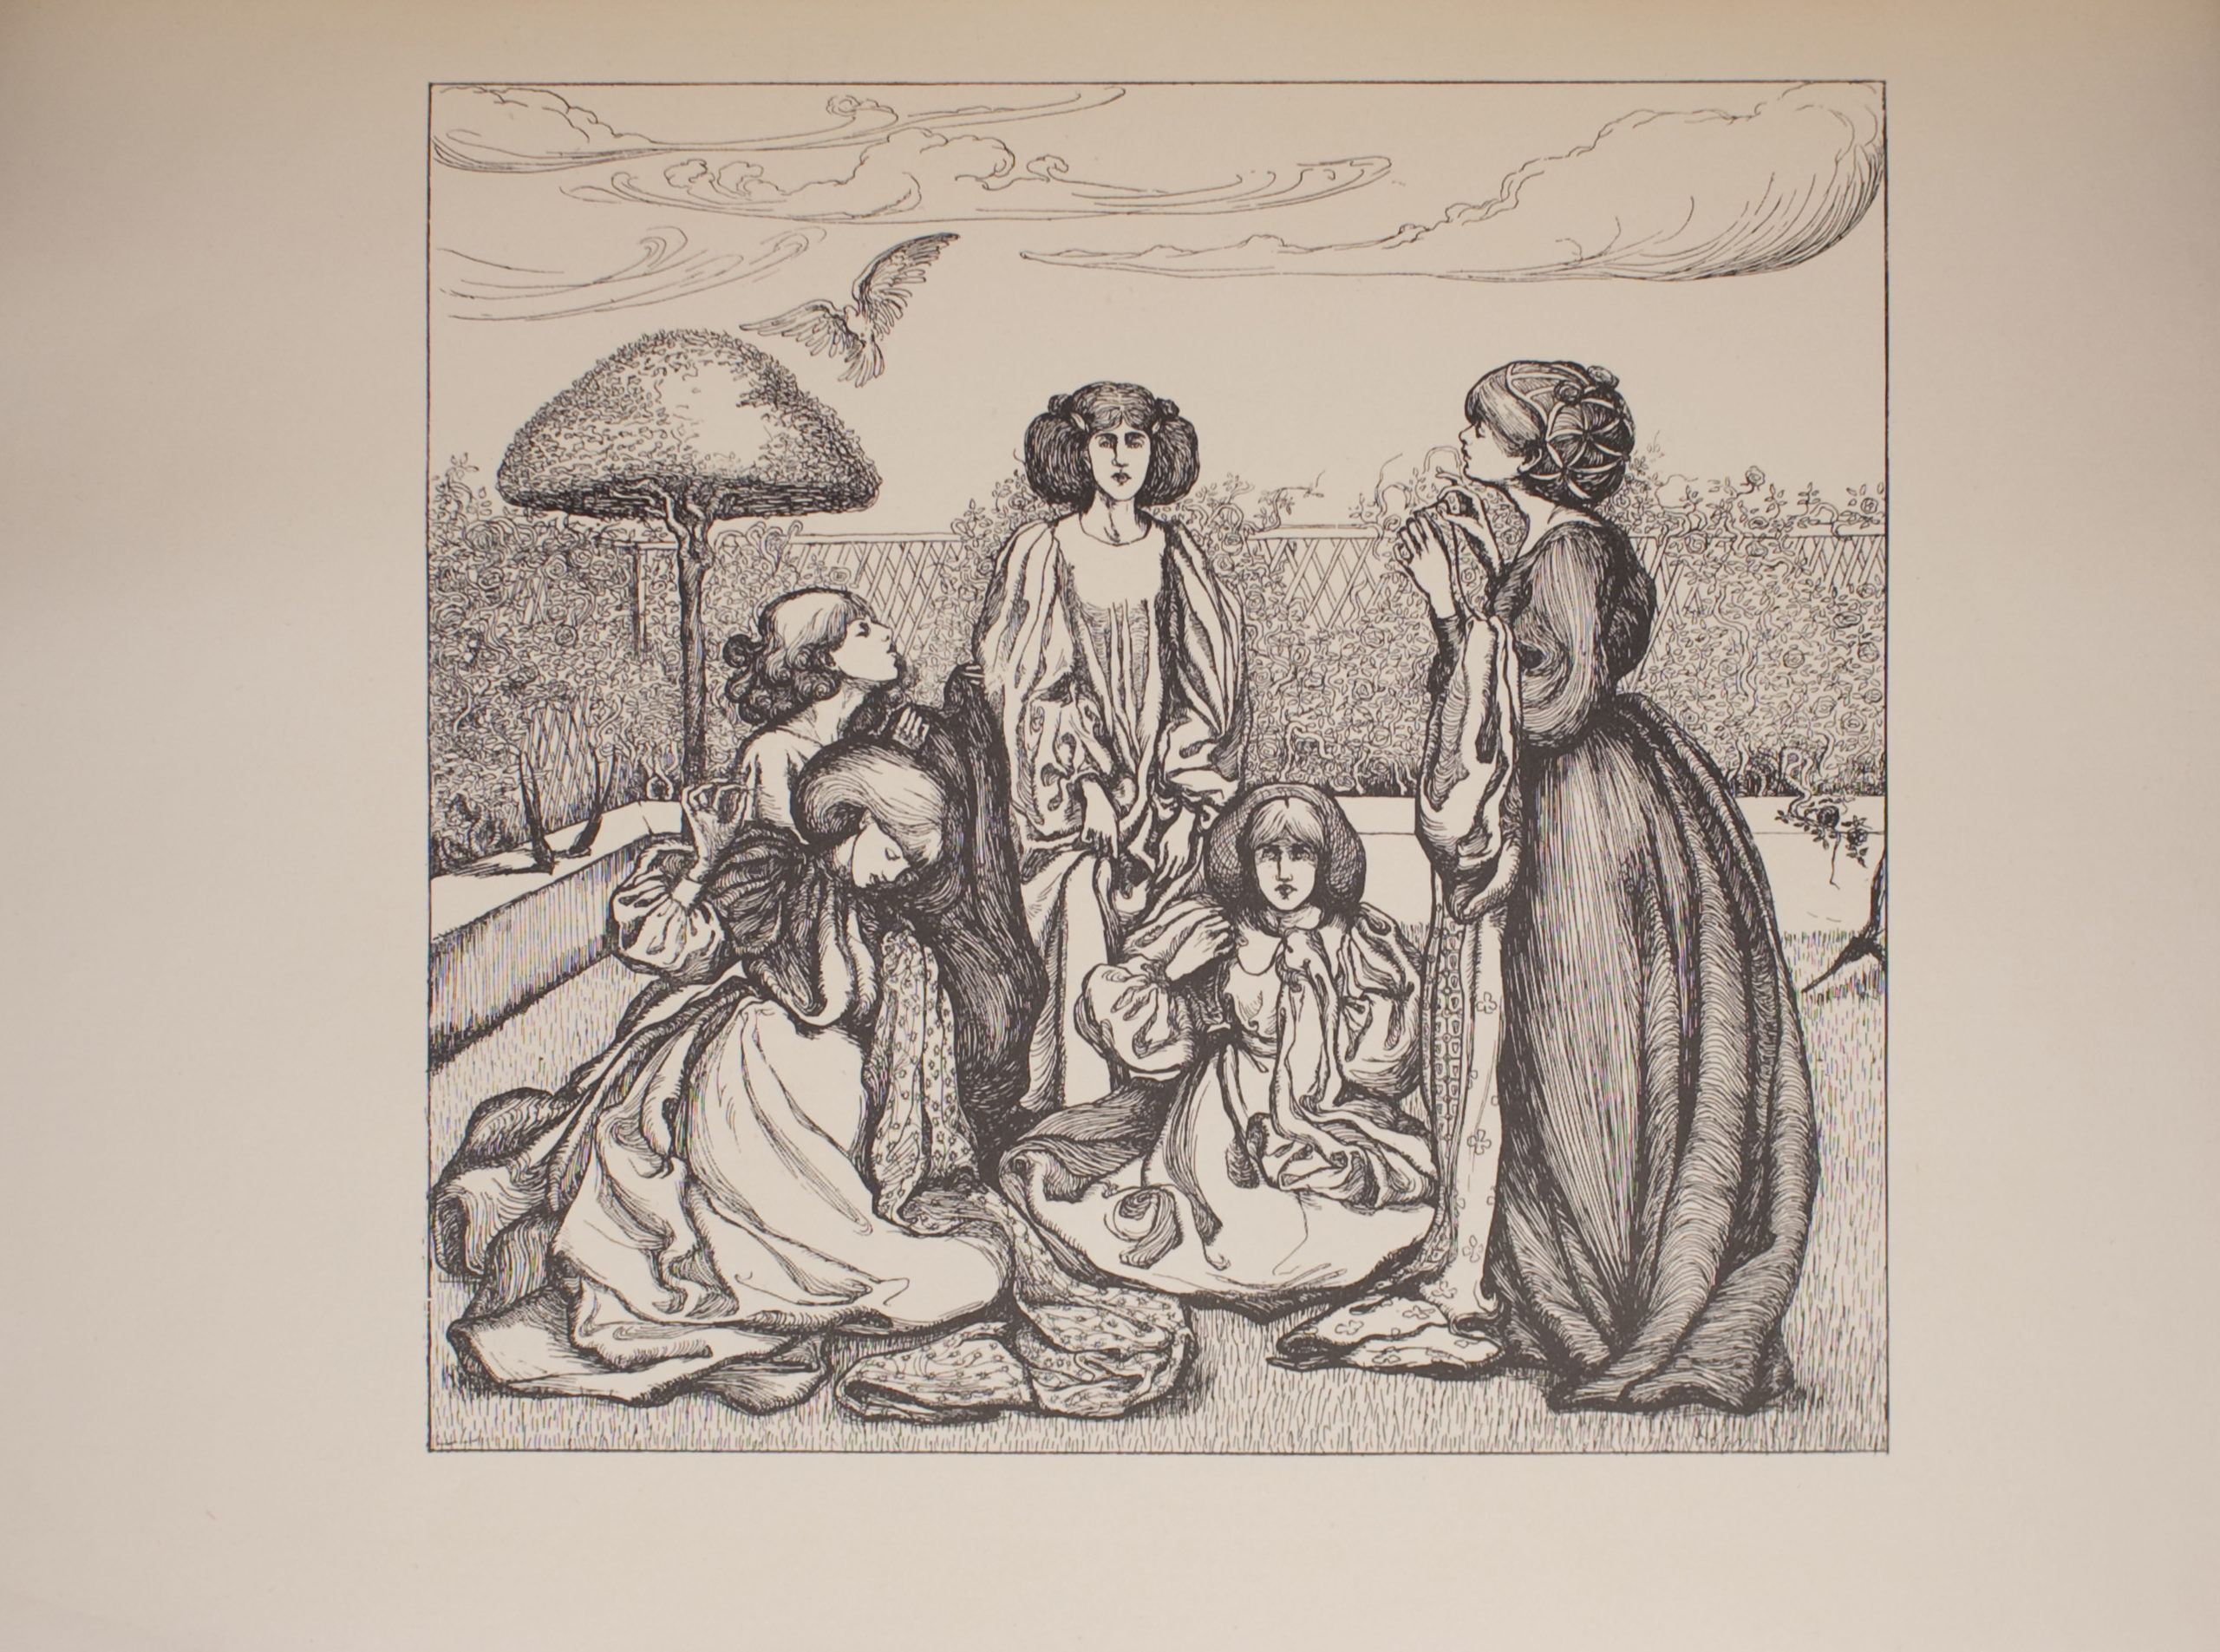 Image is of five women in a yard All of the women are wearing dresses with a high neckline and long sleeves They all have voluminous hair The woman in the centre is standing and shown in full profile She is holding her skirt below the waist Her hair is parted down the middle The woman to her right is sitting on the ground she is also shown in full profile Her right hand is raised halfway between her face and her body her left hand is also raised though it is hidden under an article of clothing Her hair is also parted down the middle Shadows fall slightly over her eyes Beside her is a woman standing in profile Her dress is dark with a patterned petticoat Her dark hair is done up and secured by a snood She is lifting her head slightly Her left and right hands are raised up toward her chest in her right hand is a sewing needle Across from her are two kneeling women shown in profile The woman in the foreground has shoulder-length hair and has her head tilted toward the ground Her right hand is raised and has a sewing needle and thread in it Her left hand is clutching some patterned fabric on which she is stitching Behind her is a woman with curly hair with her head tilted upward She is holding a dark fabric in her hands In the background is a low wall and a trellis with roses growing on it There is a tree with a slender trunk and a triangular-shaped canopy in the left background of the image There is a bird flying above it The sky is cloudy The image is horizontally displayed